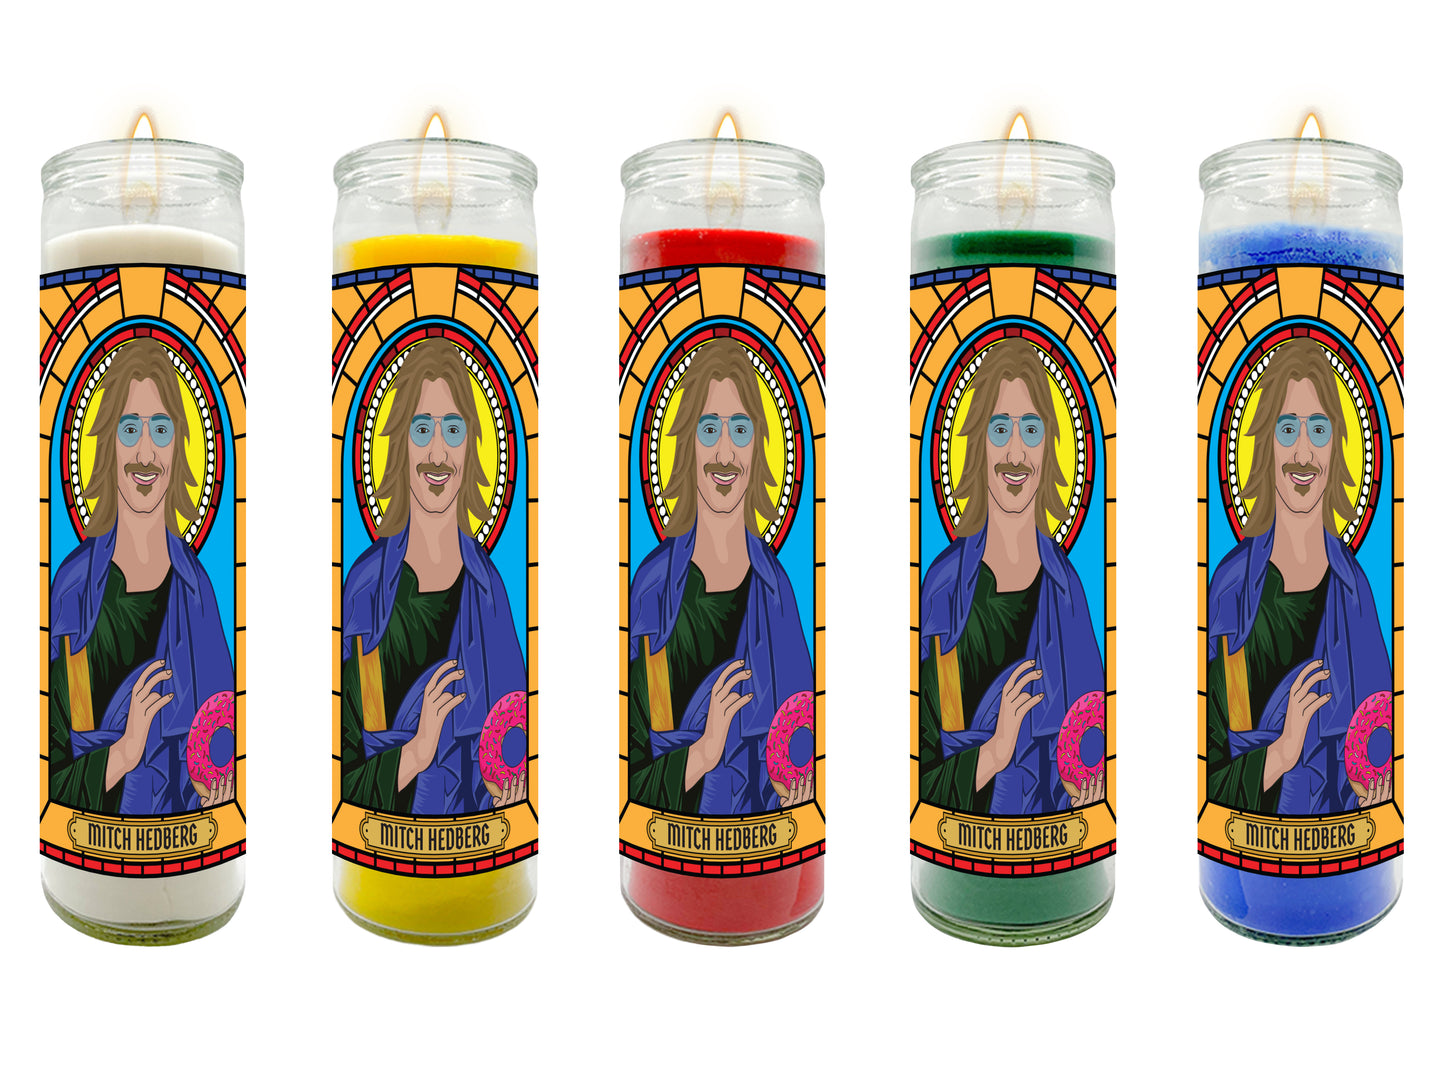 Mitch Hedberg Illustrated Prayer Candle